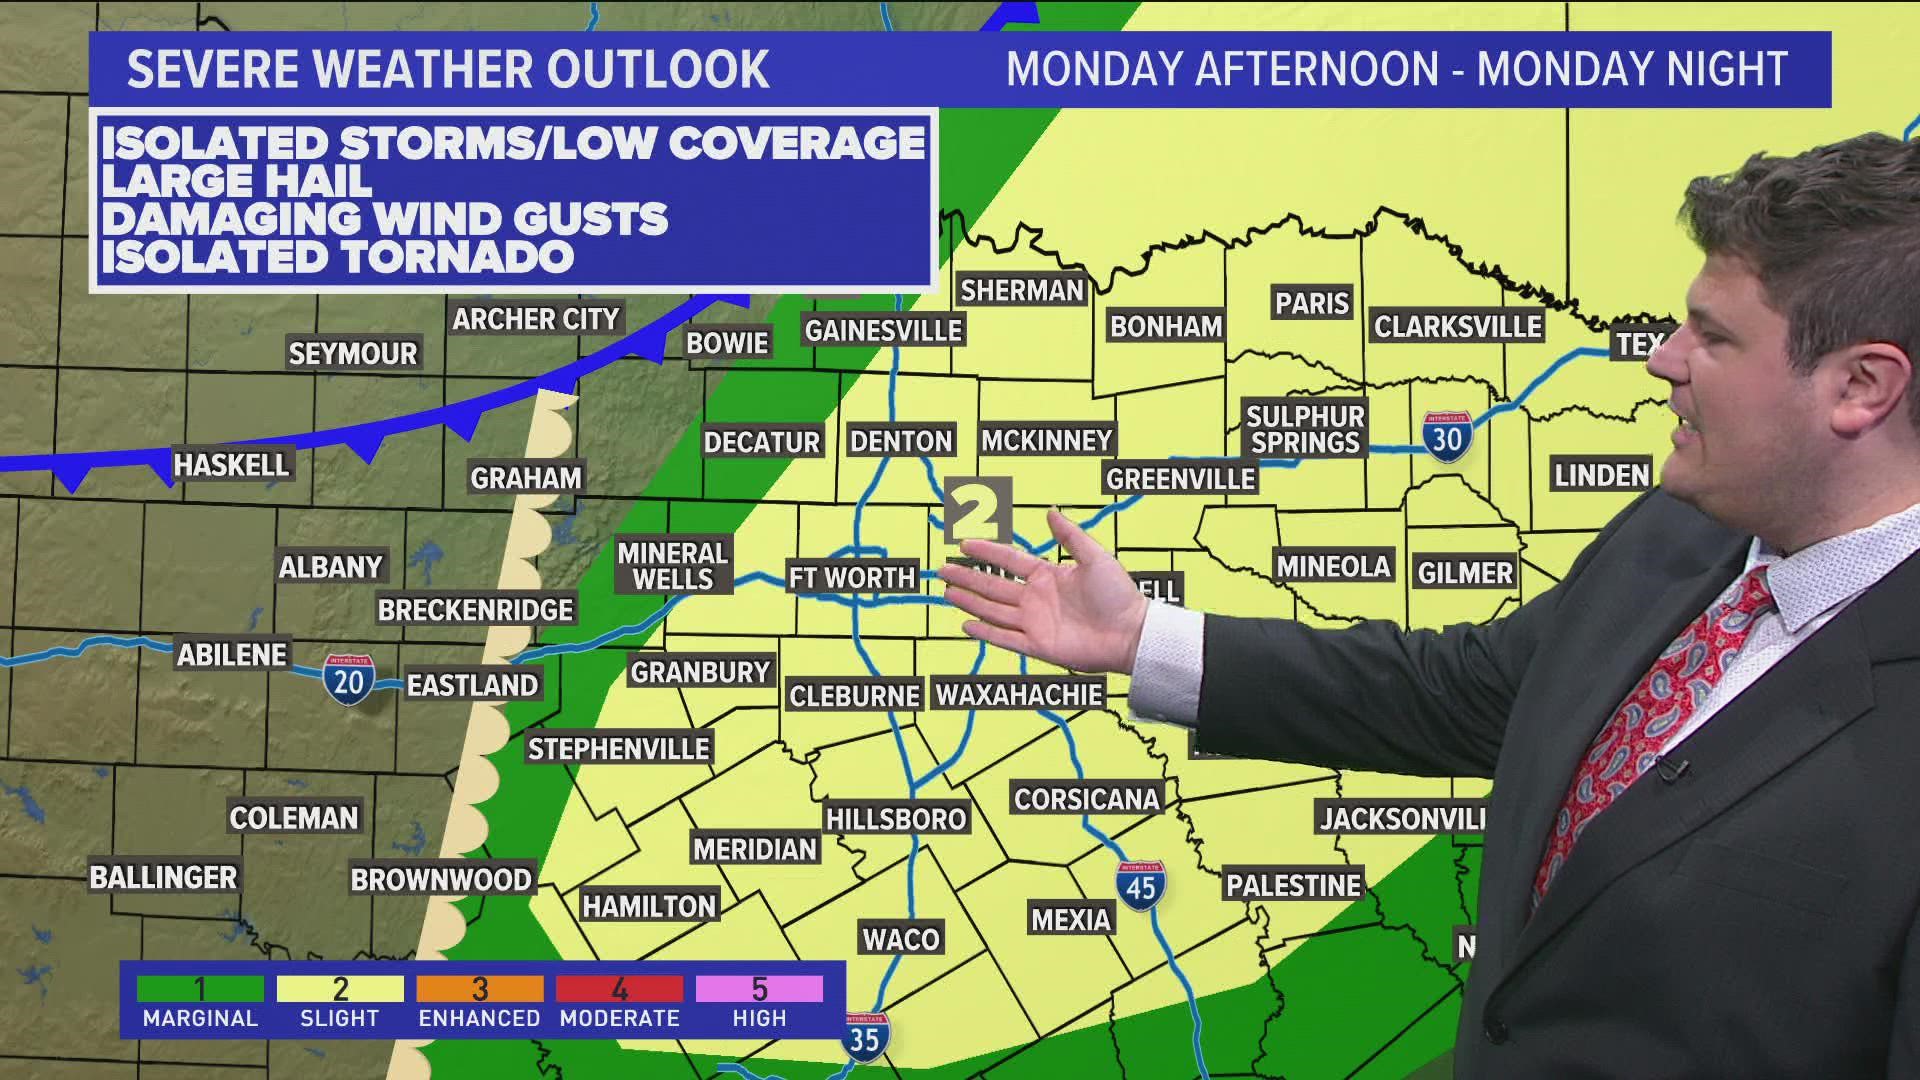 Severe storms are possible on Monday, Tuesday and Wednesday. Here's the latest on what to expect.